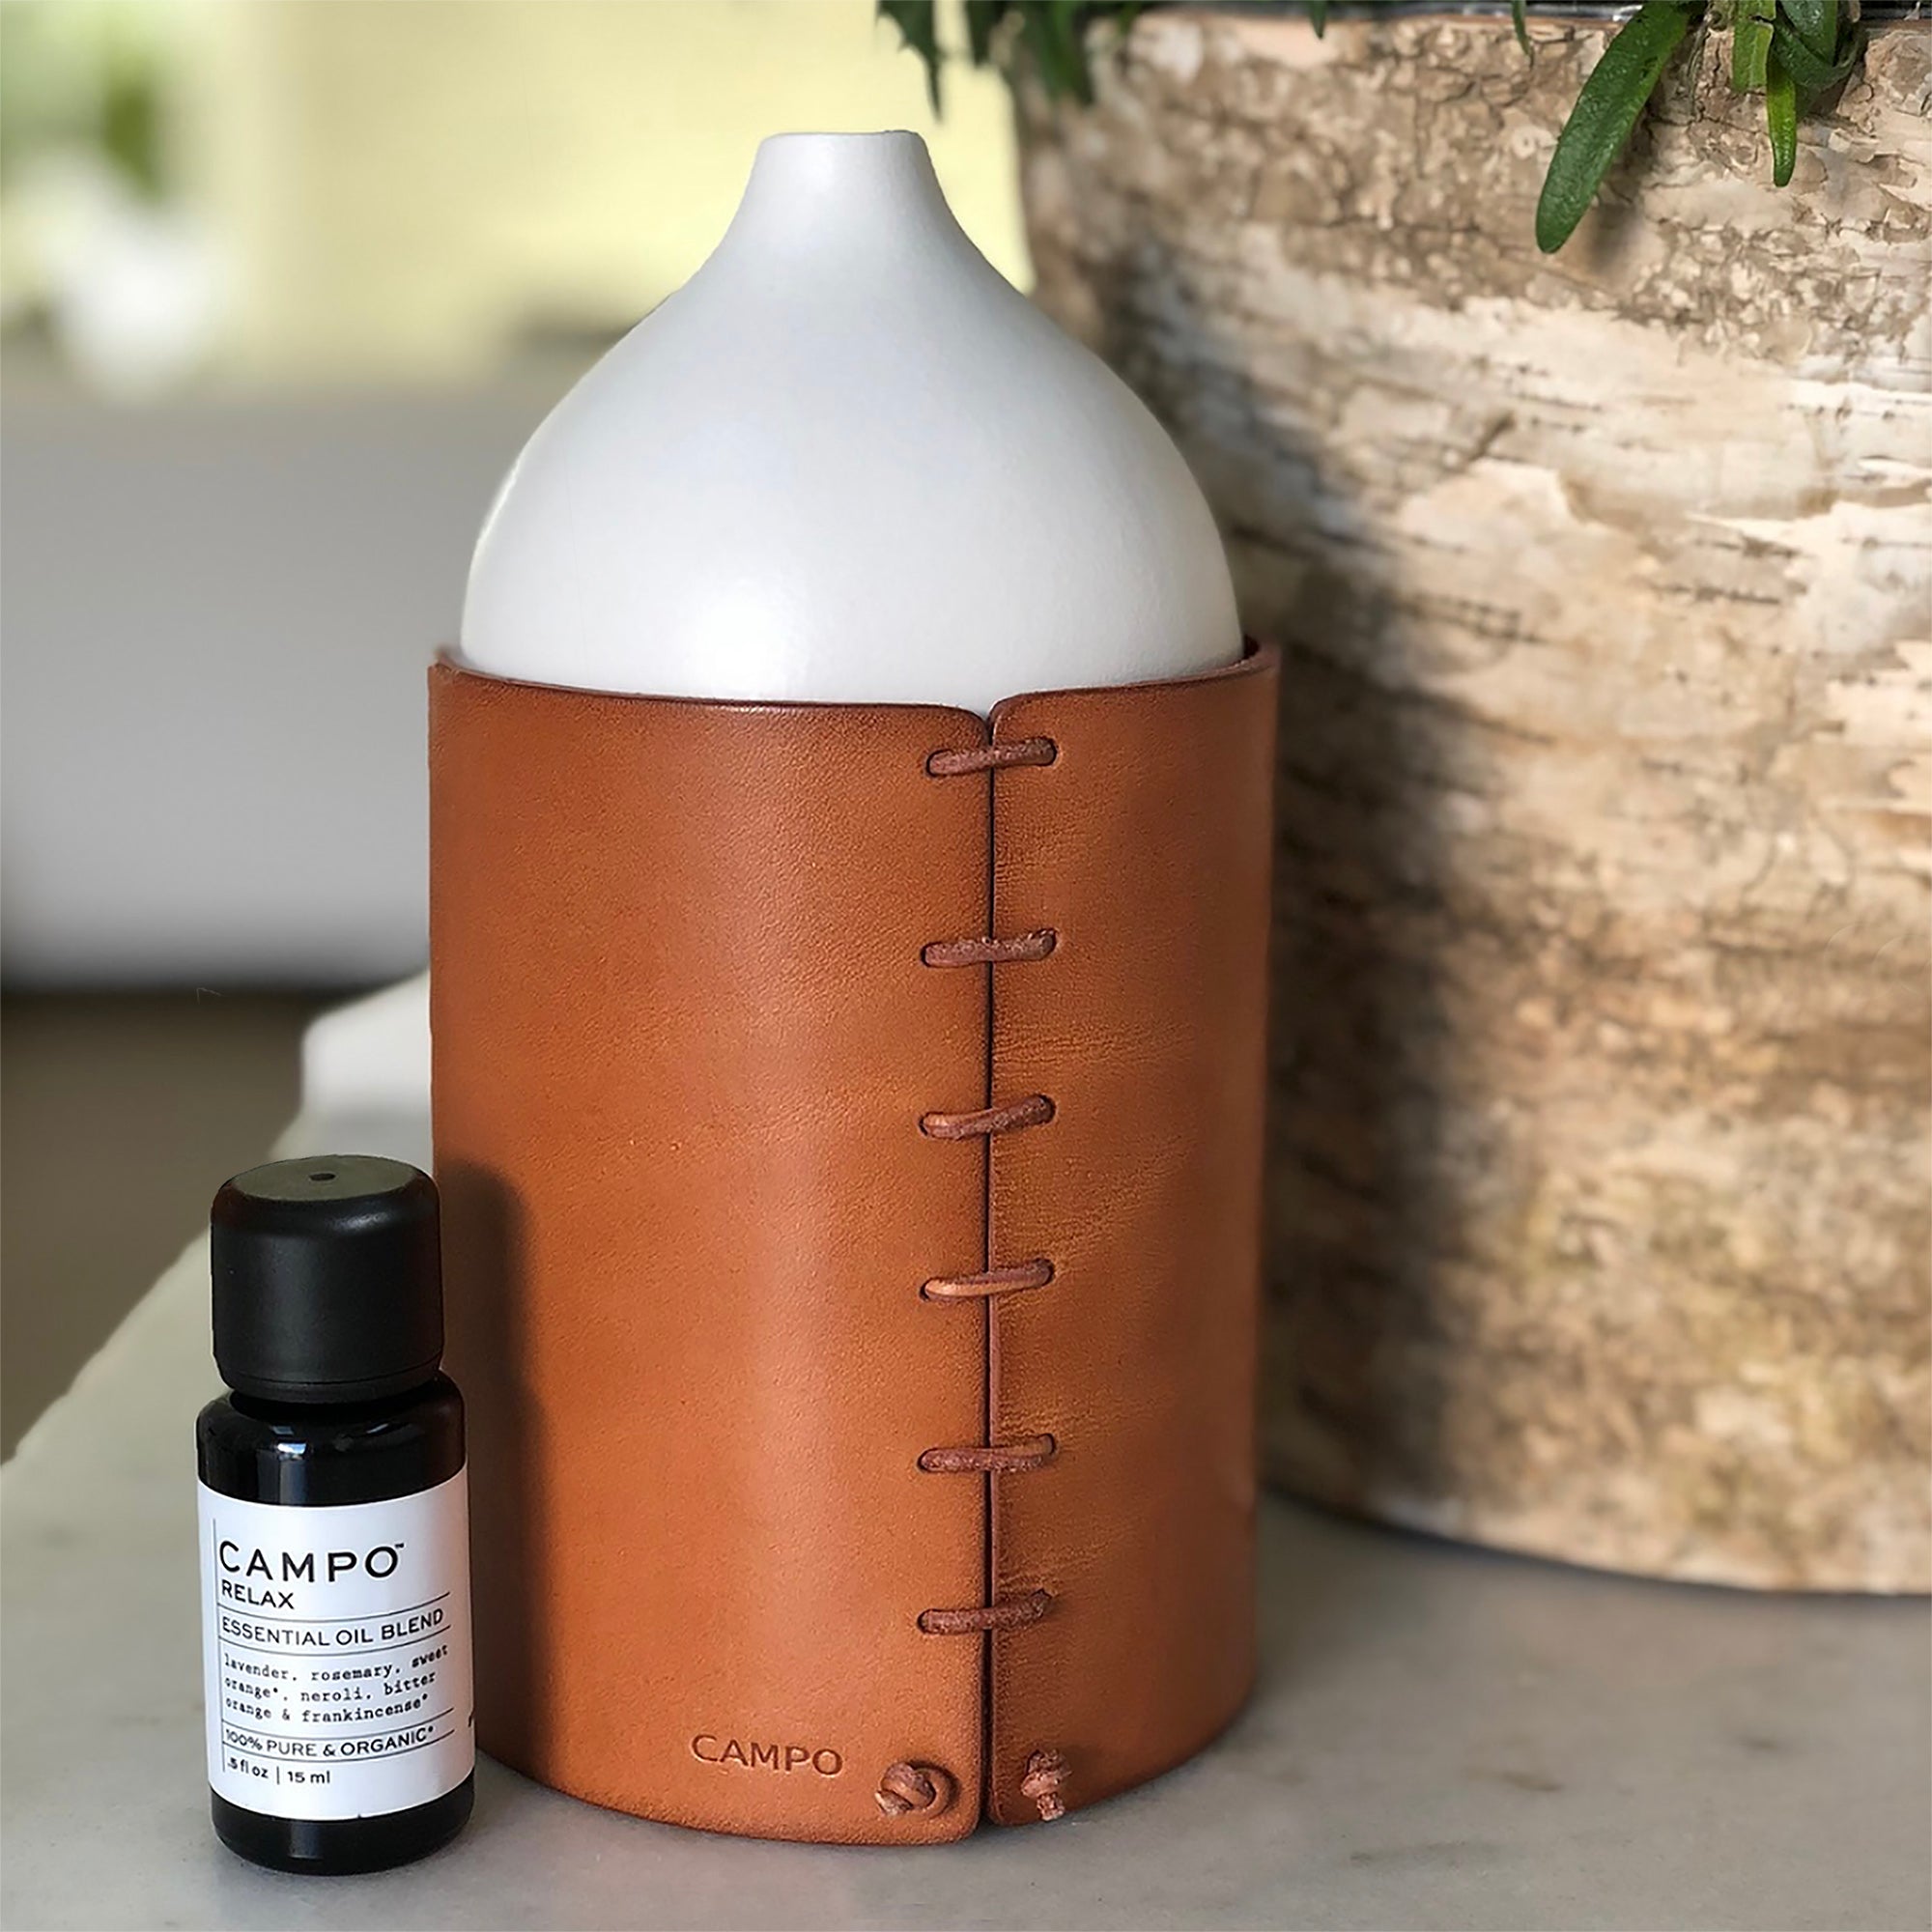 DIFFUSERS - CLEANSE THE AIR NATURALLY - CAMPO